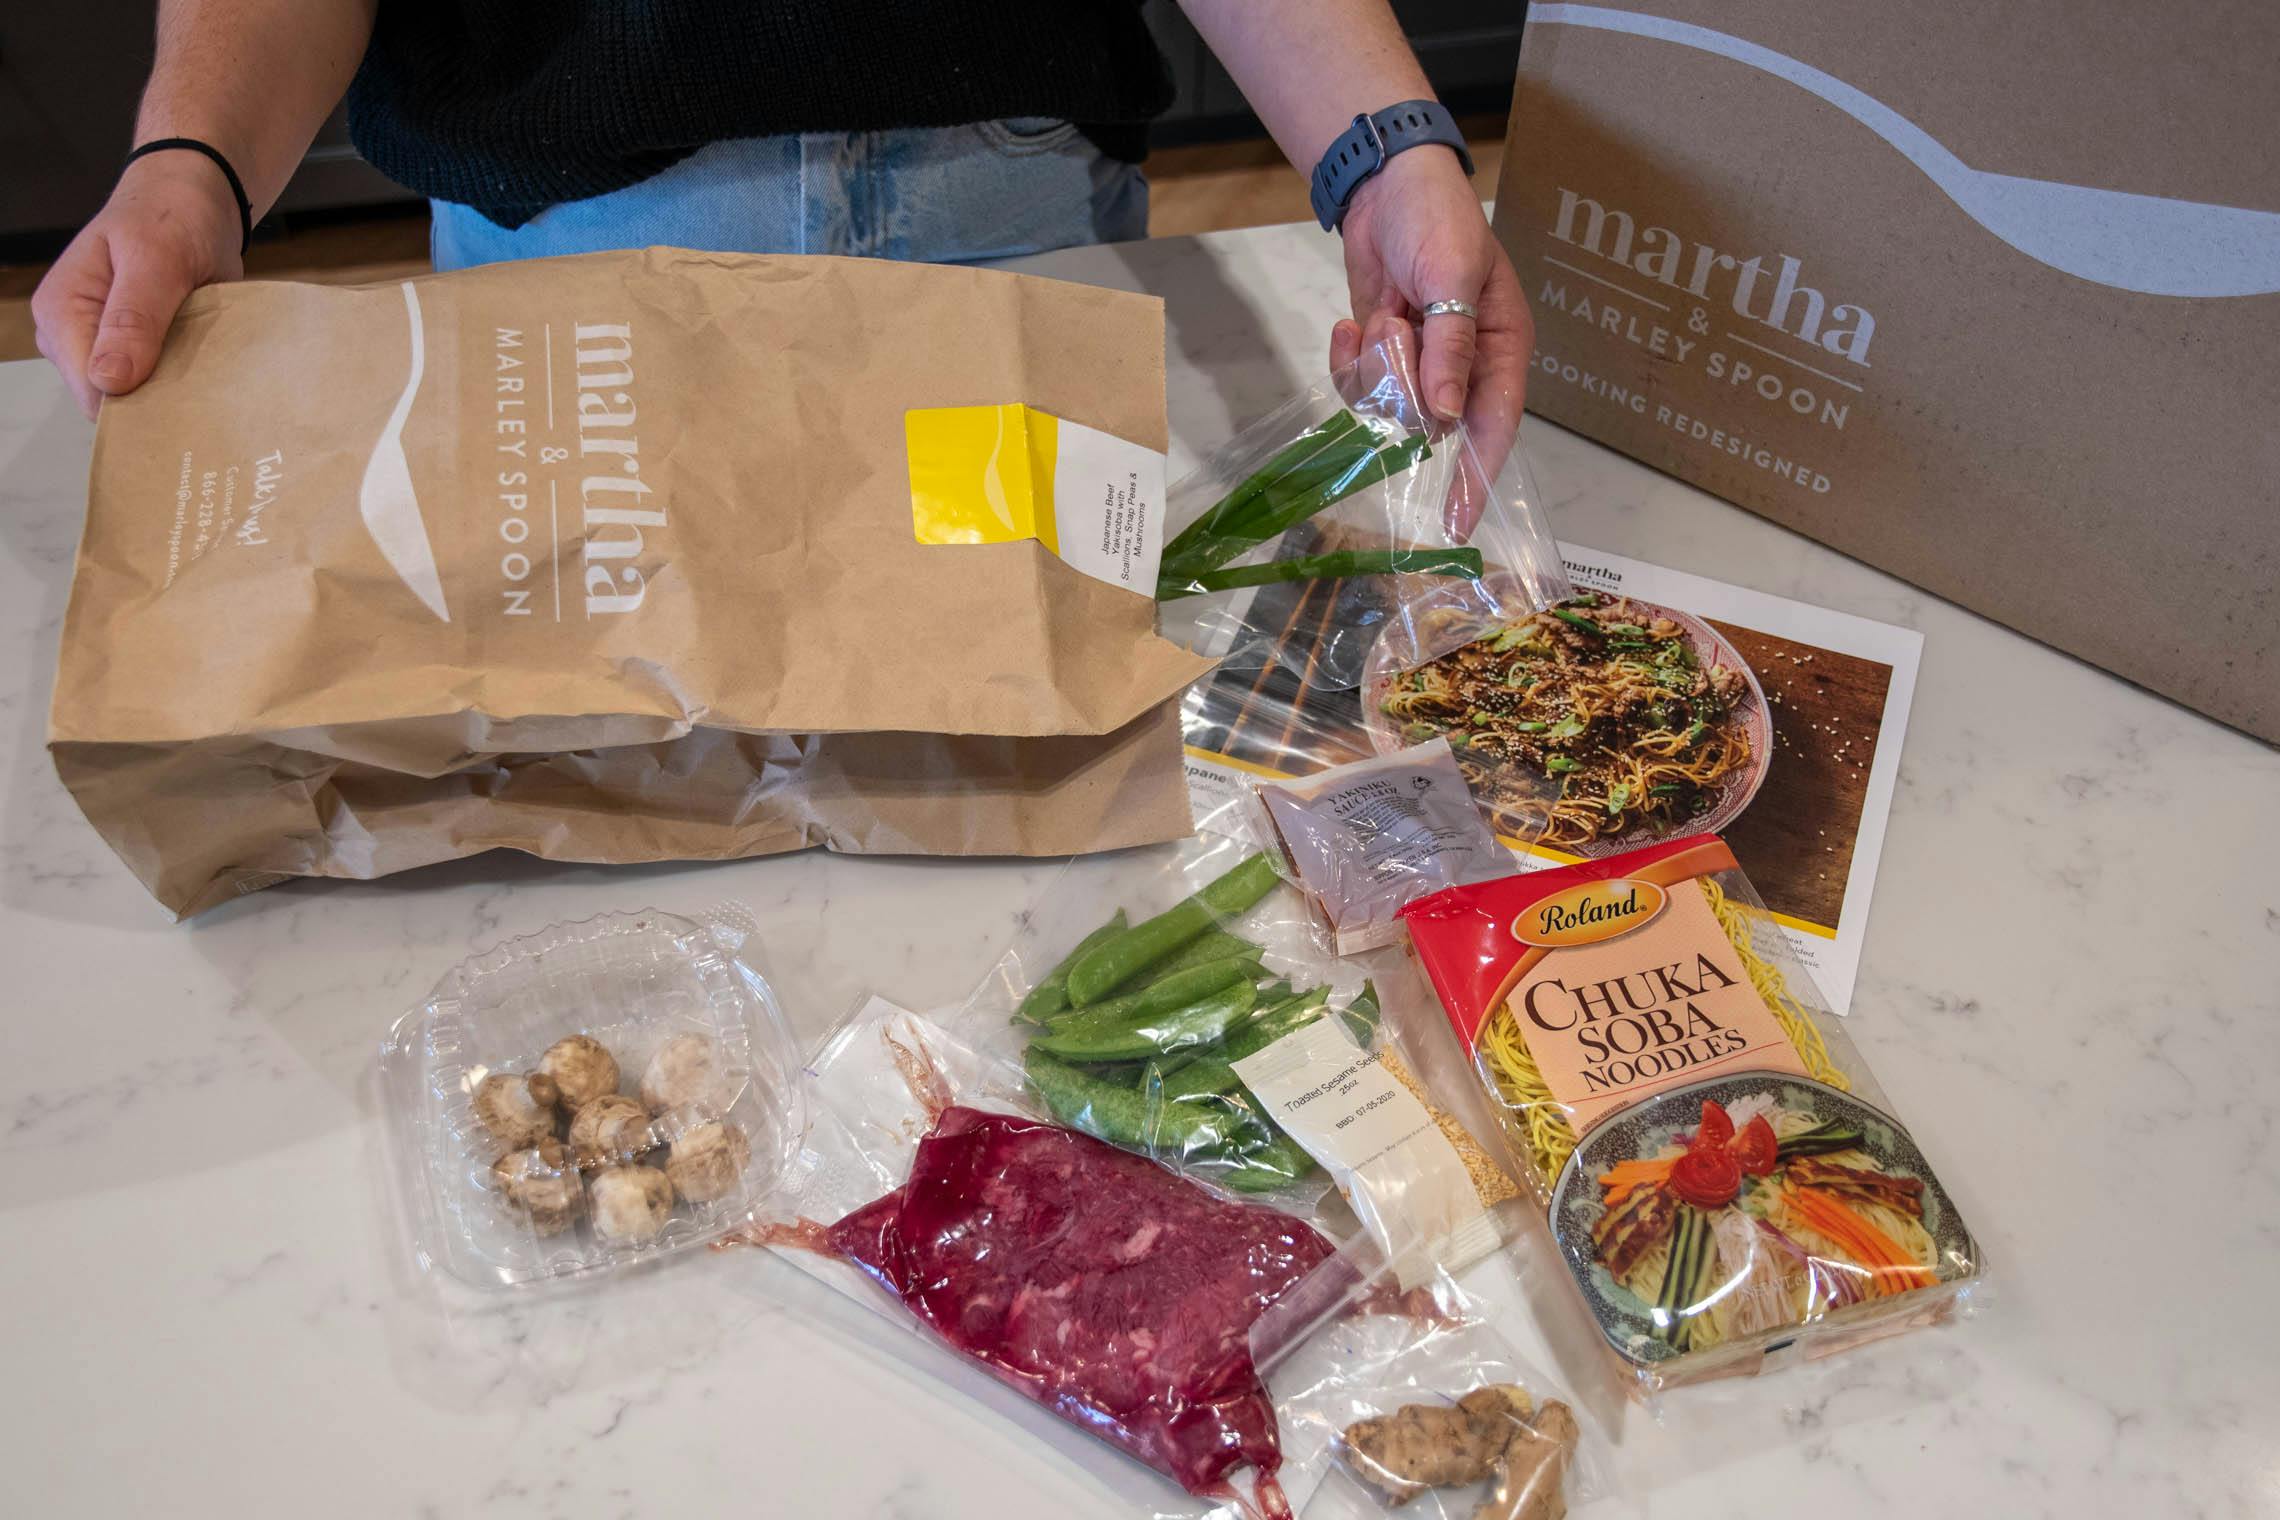 My First Meal Kit Experience - Carrie Elle